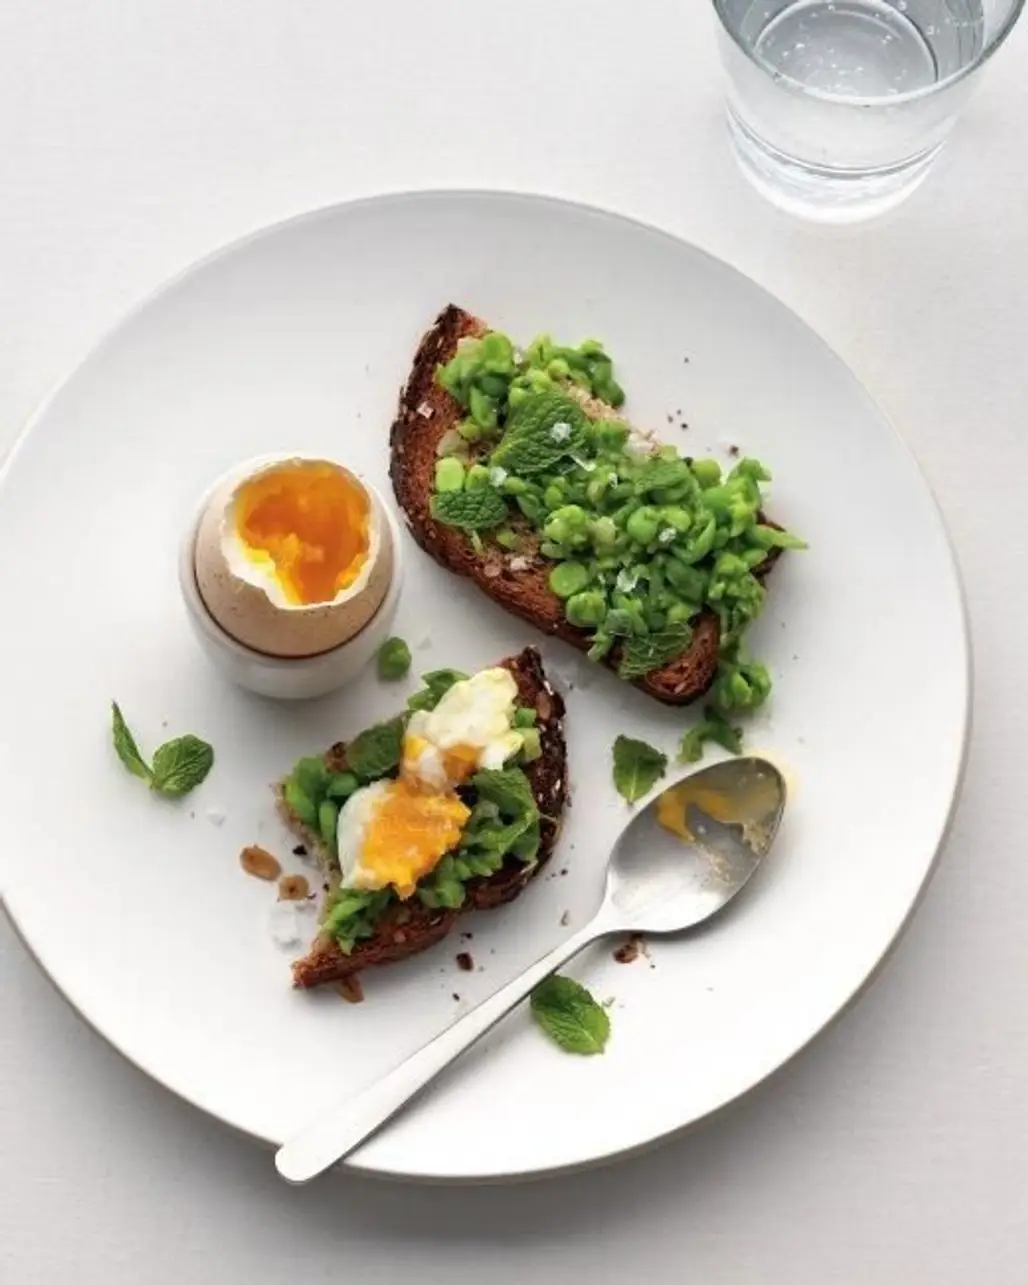 Soft-Boiled Egg with Mashed Peas on Toast